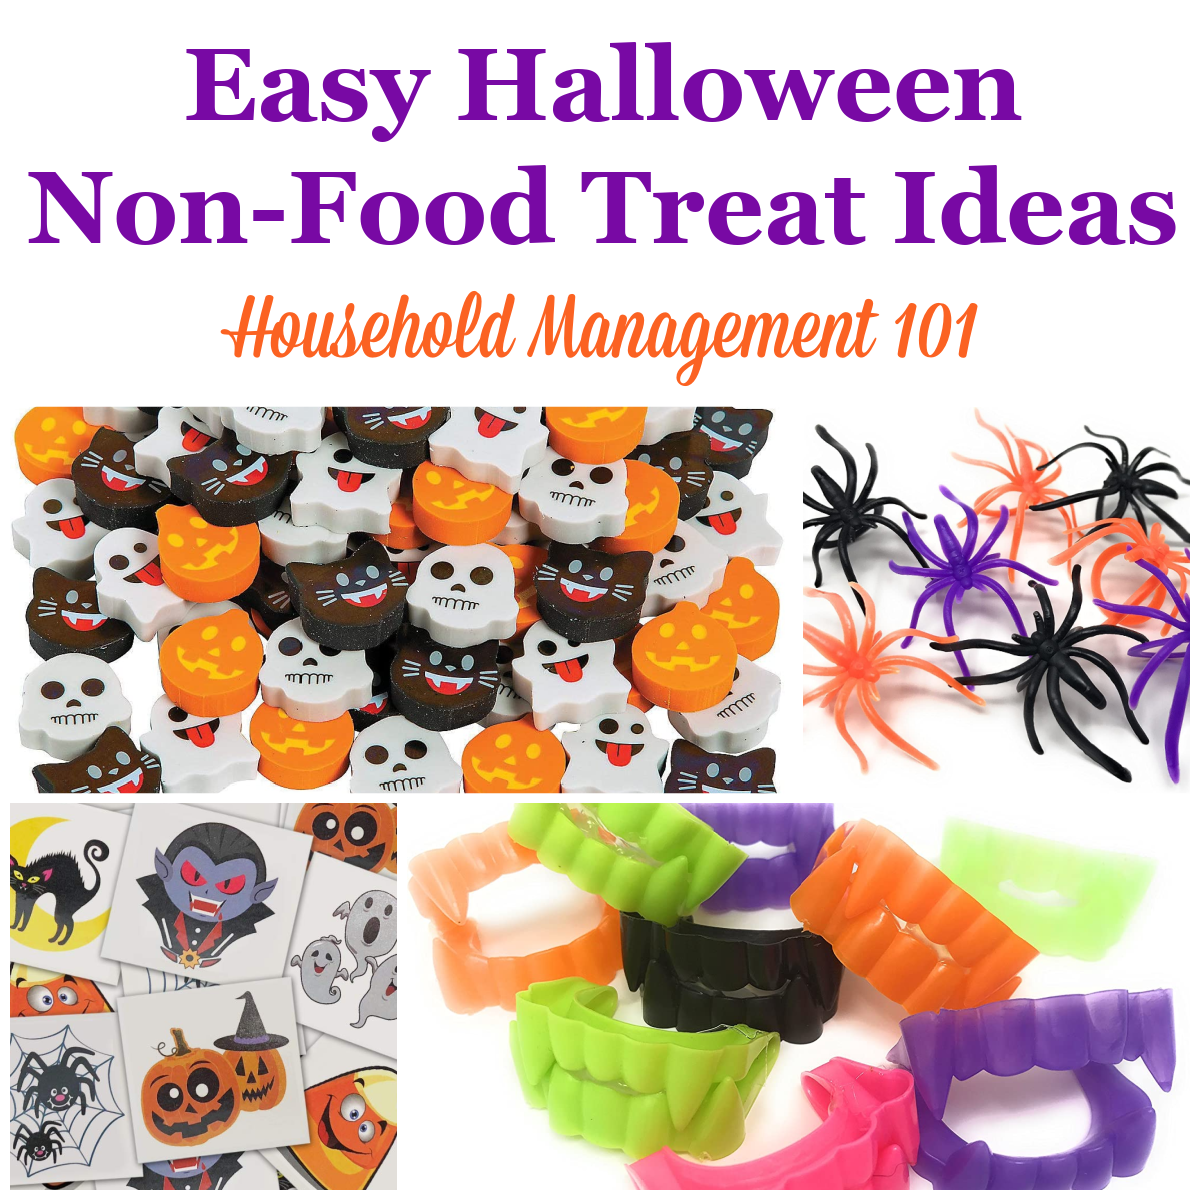 Here are easy Halloween non-food treat ideas for trick or treaters, so that you can please the kids coming to your door without a lot of work on your part {on Household Management 101}